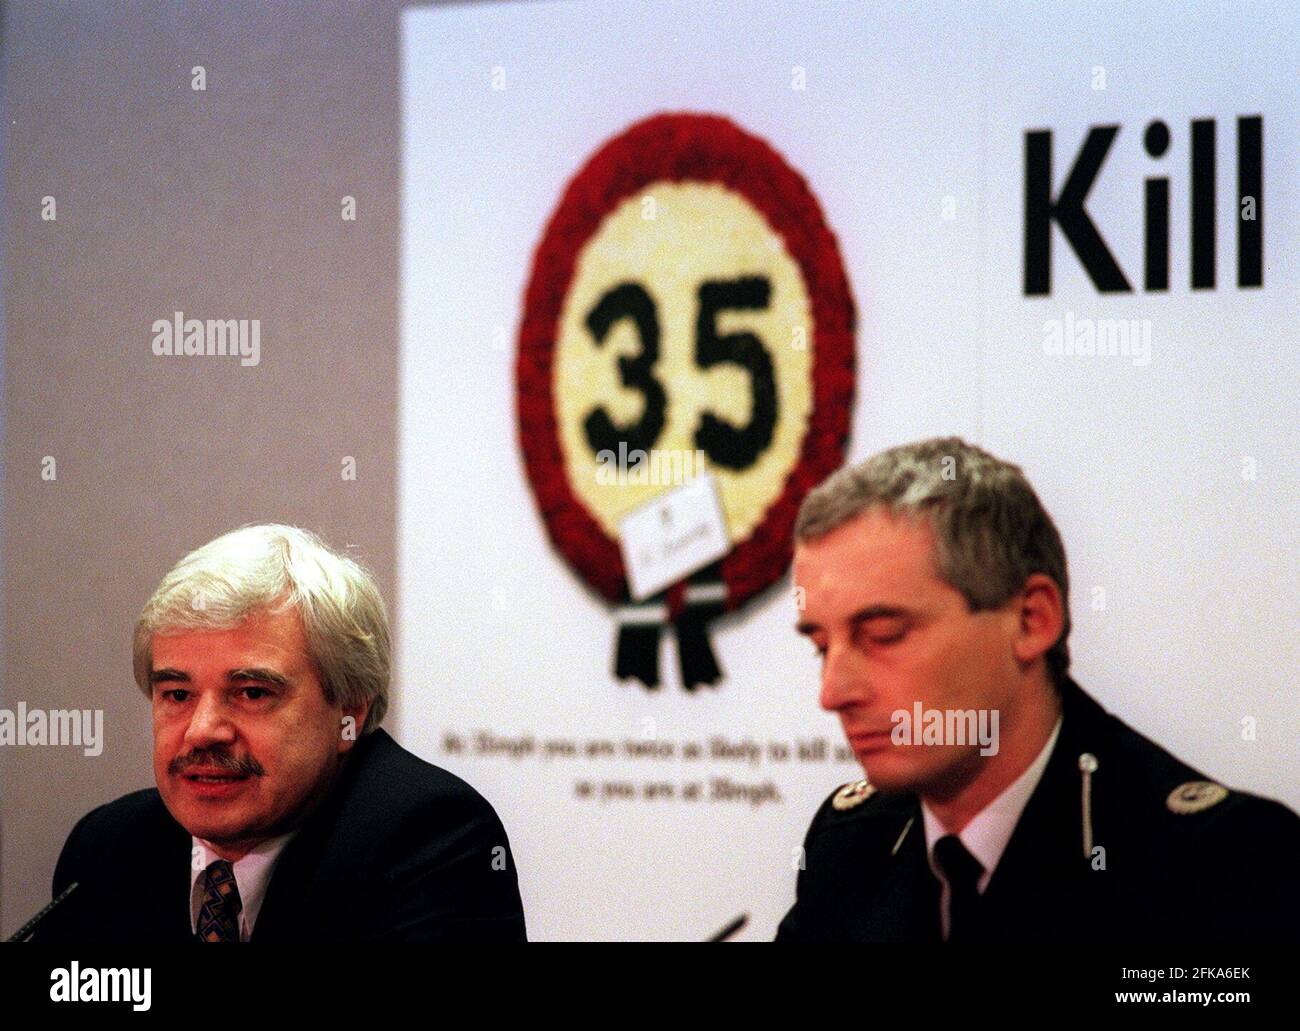 Kill Your Speed campaign Launch press conference Jan  1999Launch of new campaign called Kill Your Speed aimed at persuading drivers to slow down  Press conference with Lord Whitty Road Safety Minister and Assistant Chief Constable of Cleveland Ken Brunstrom Stock Photo